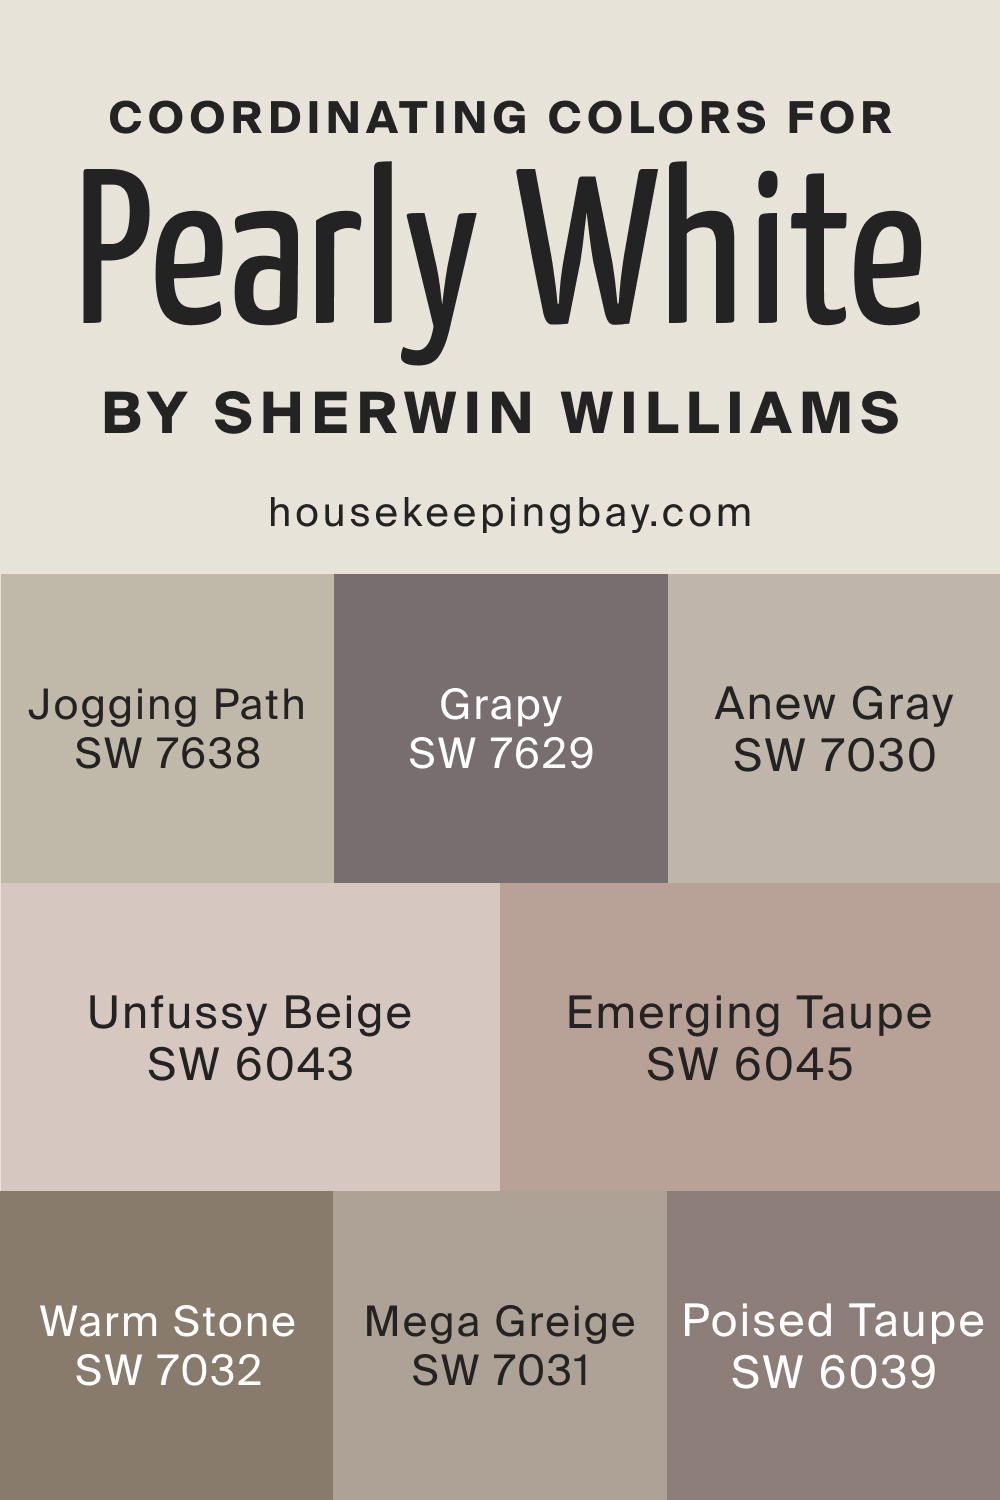 Coordinating Colors for SW Pearly White by Sherwin Williams